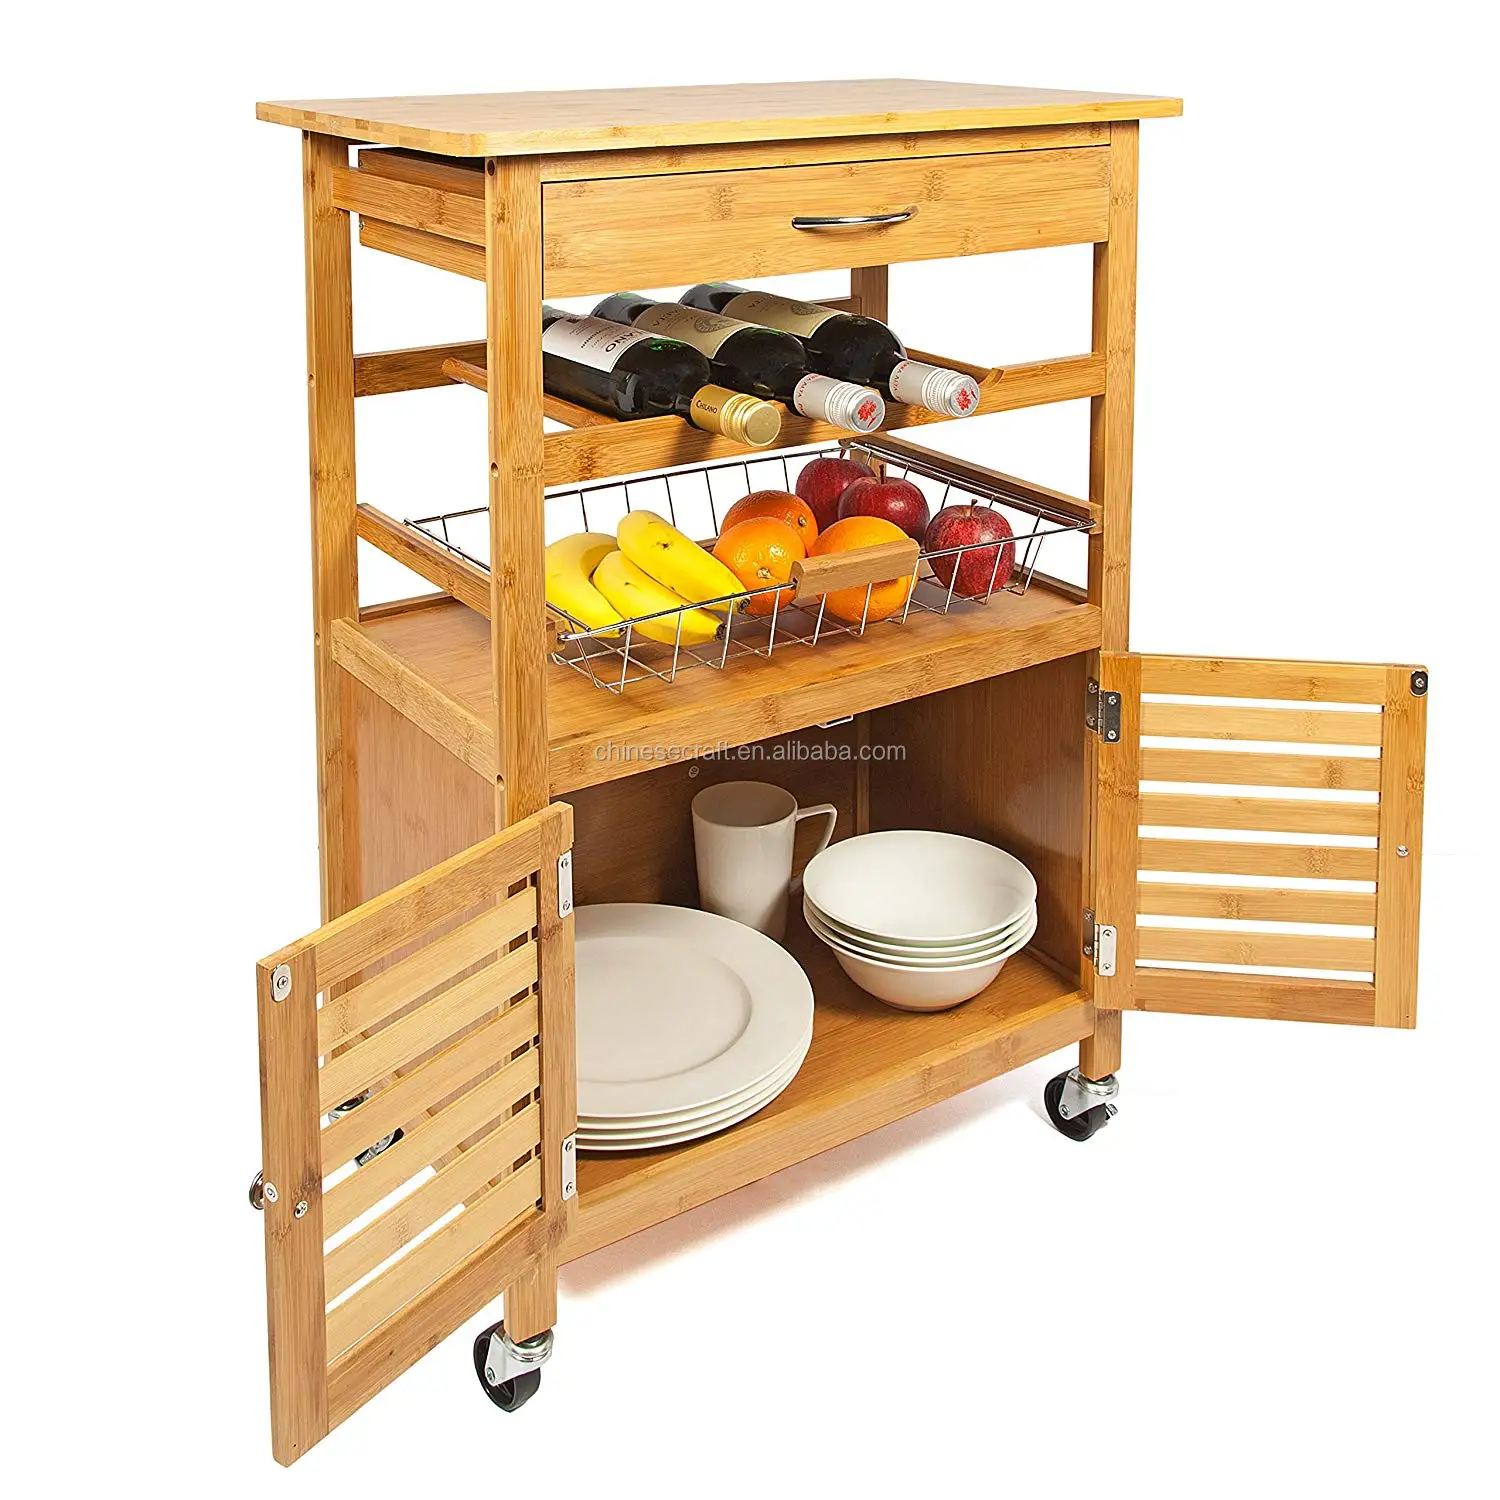 bamboo <strong>kitchen</strong> trolley cart with drawer,wire basket, cabinet &